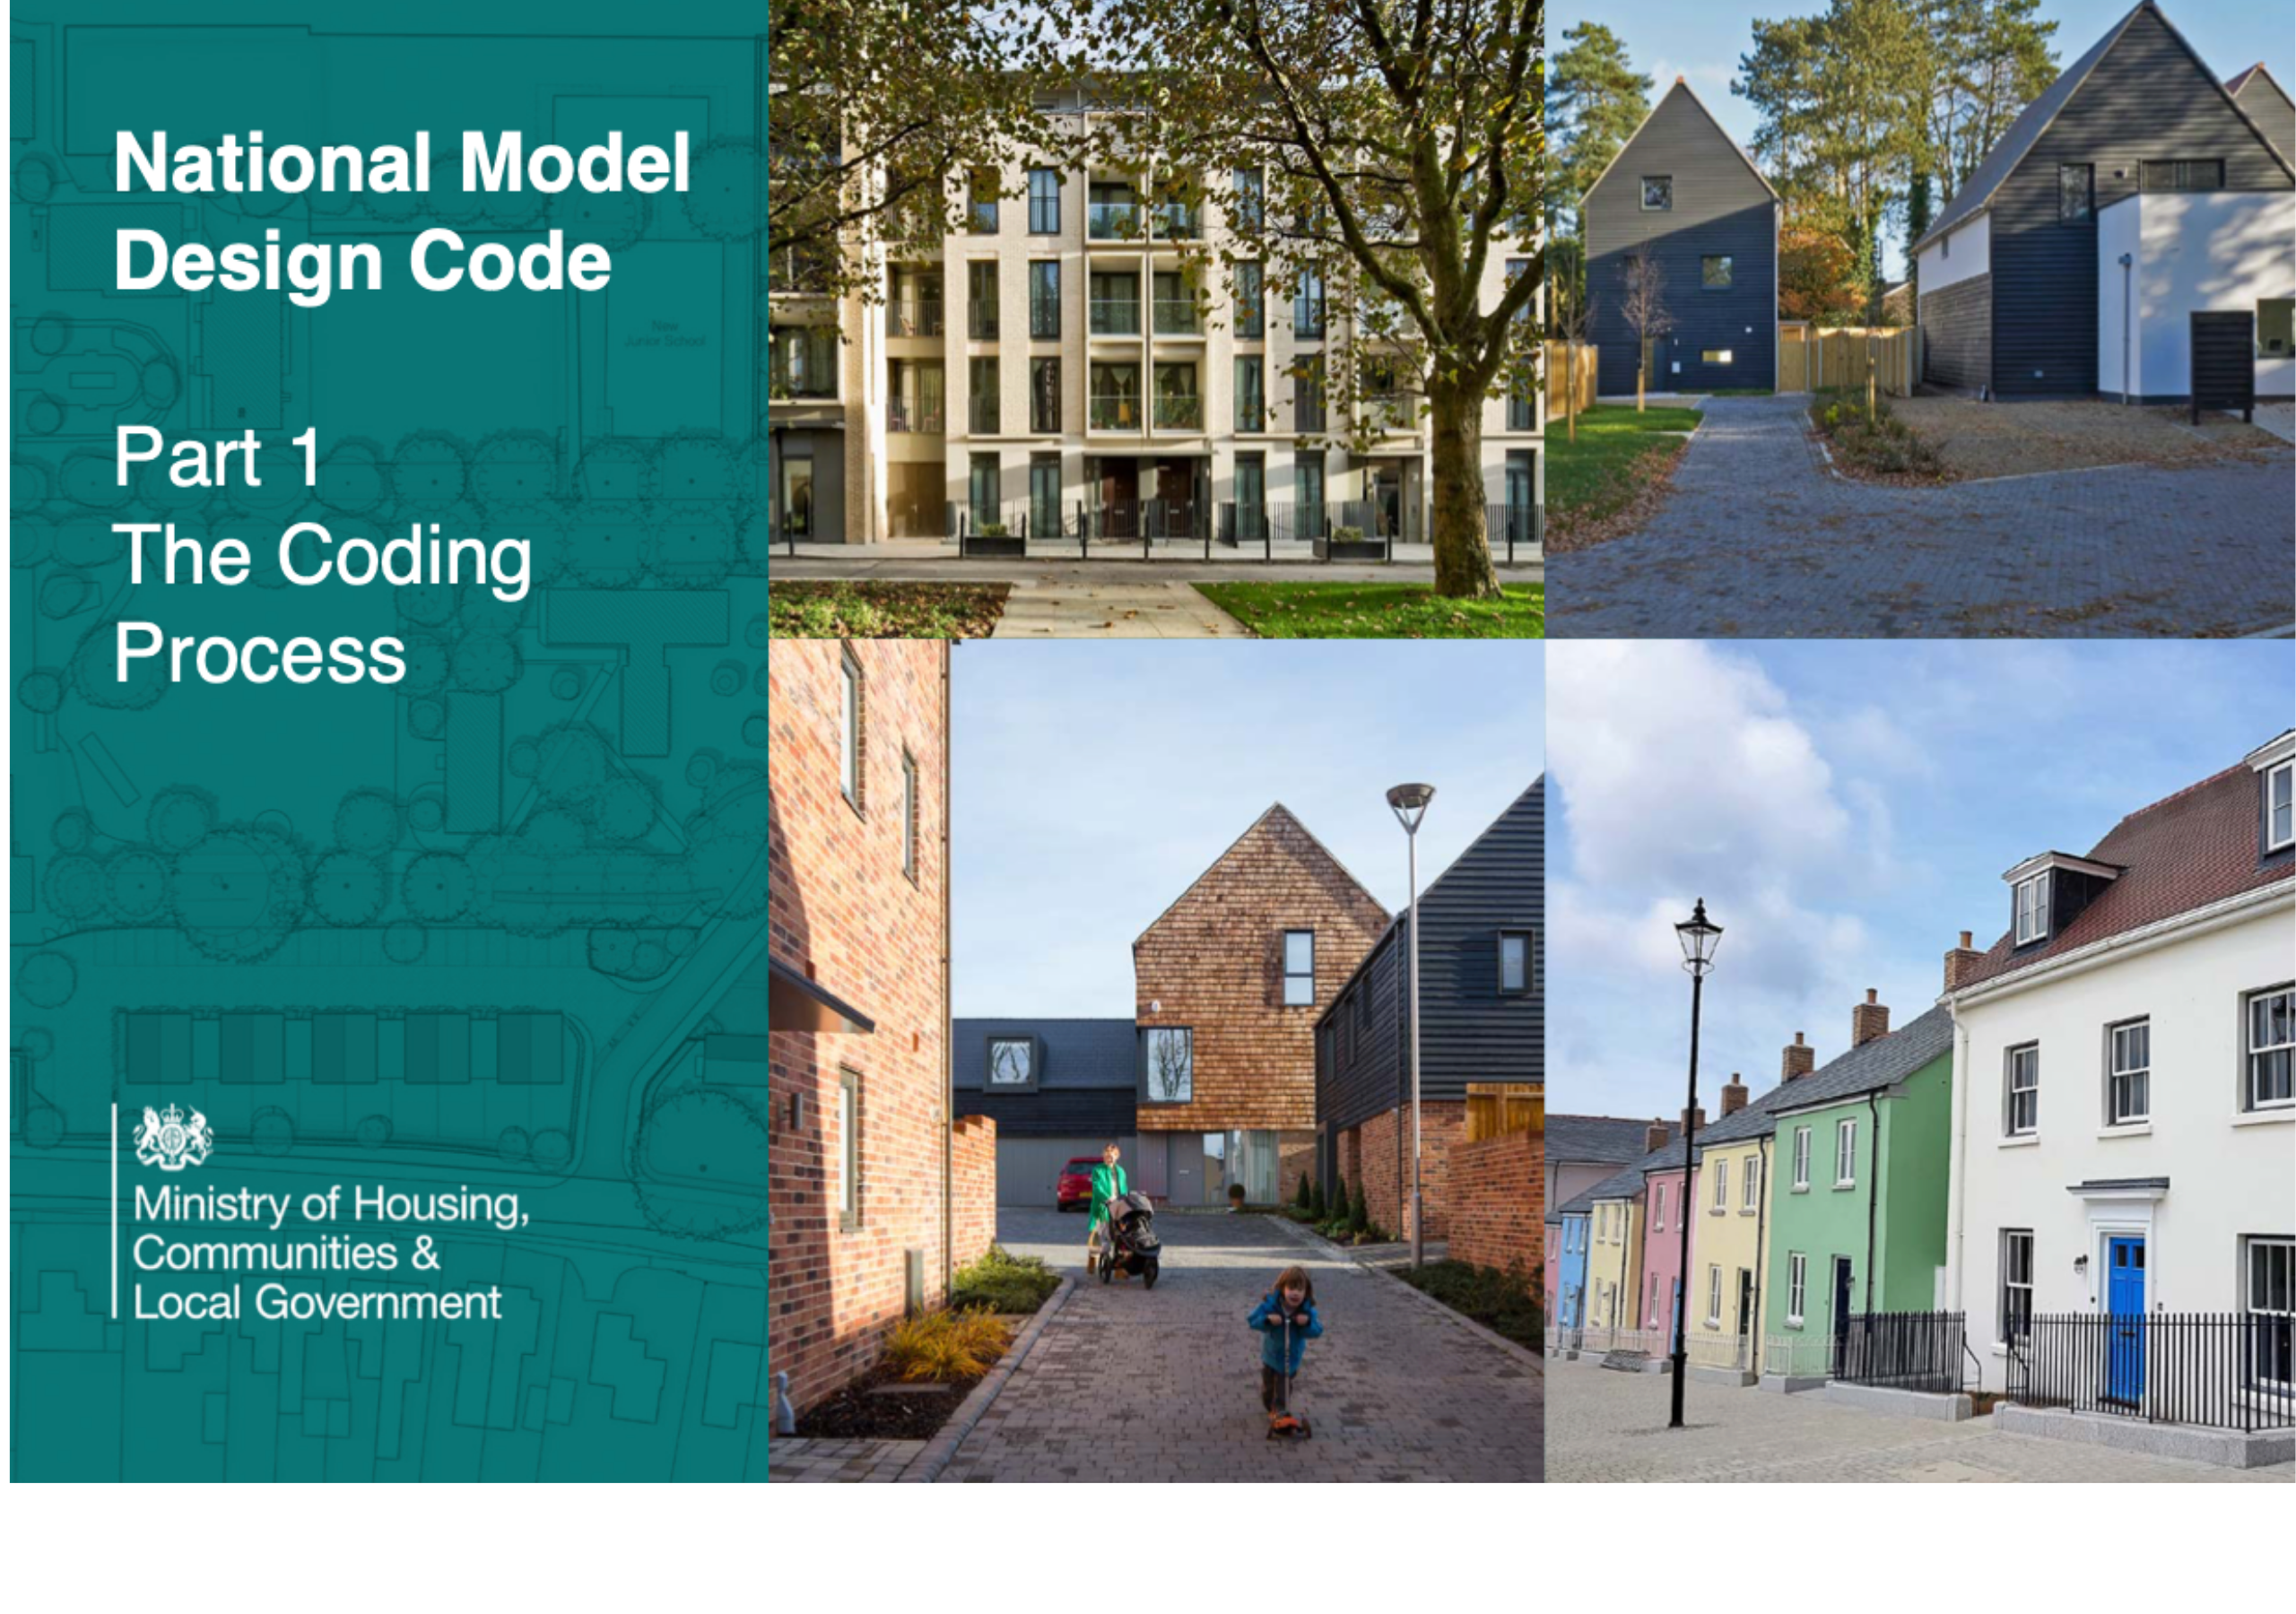  – Lunch & Learn Briefing – Lessons Learned from the National Model Design Code (NMDC) pilot